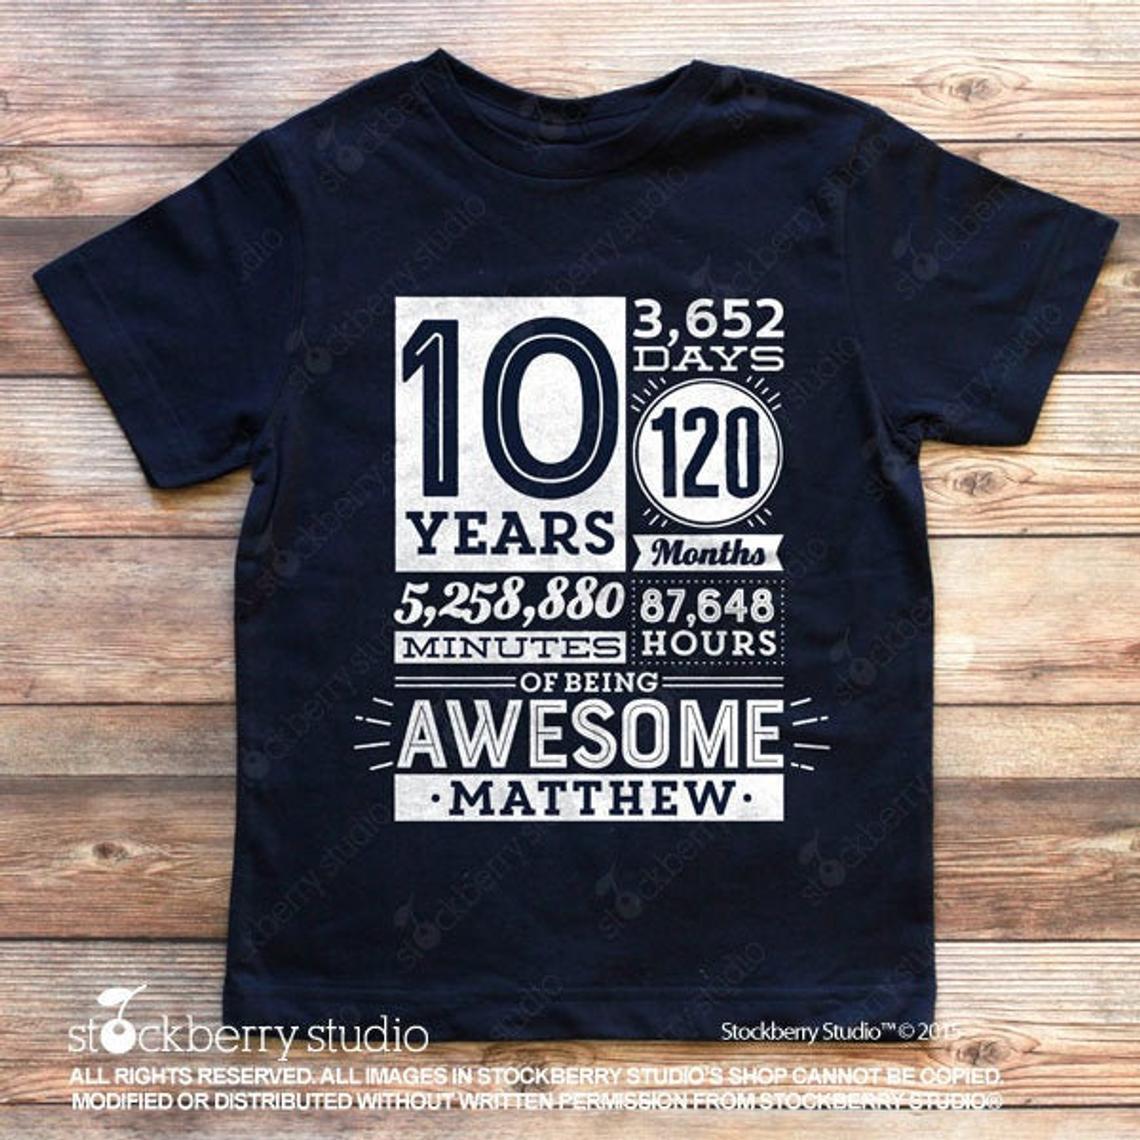 2 Years of Being Awesome 2nd Birthday Shirt (any age) - Stockberry Studio